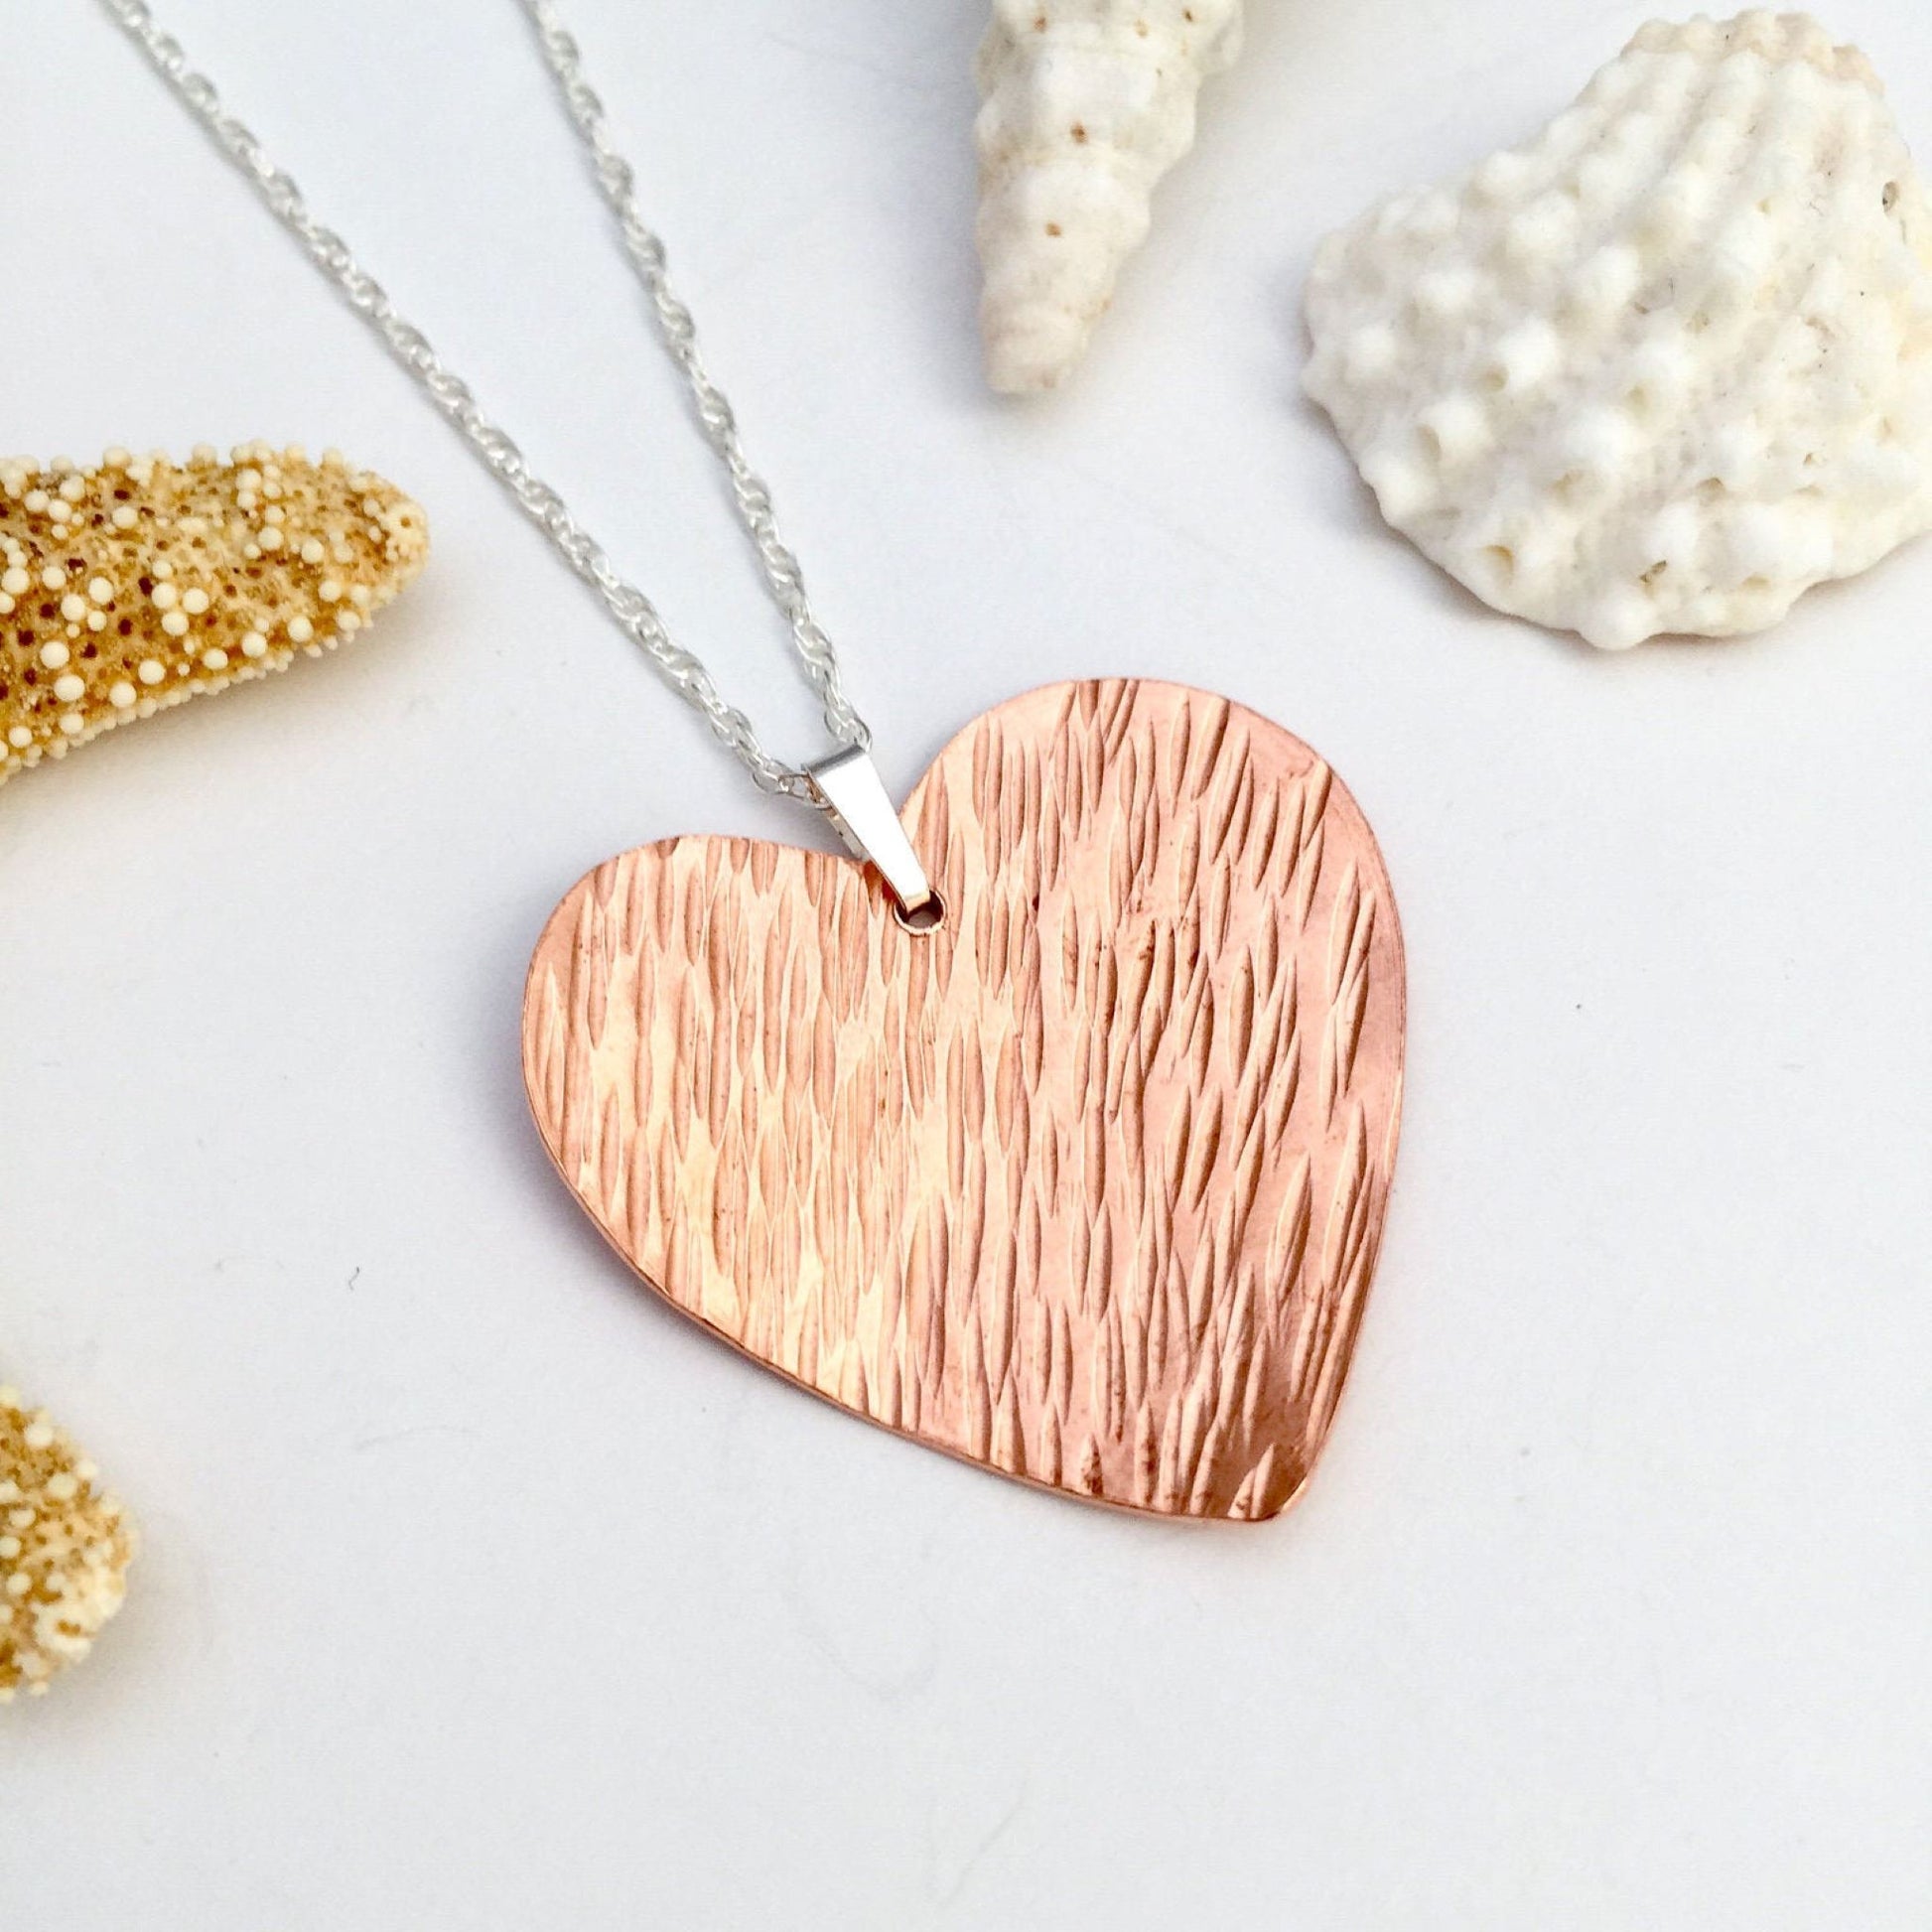 Copper Hammered Heart Necklace